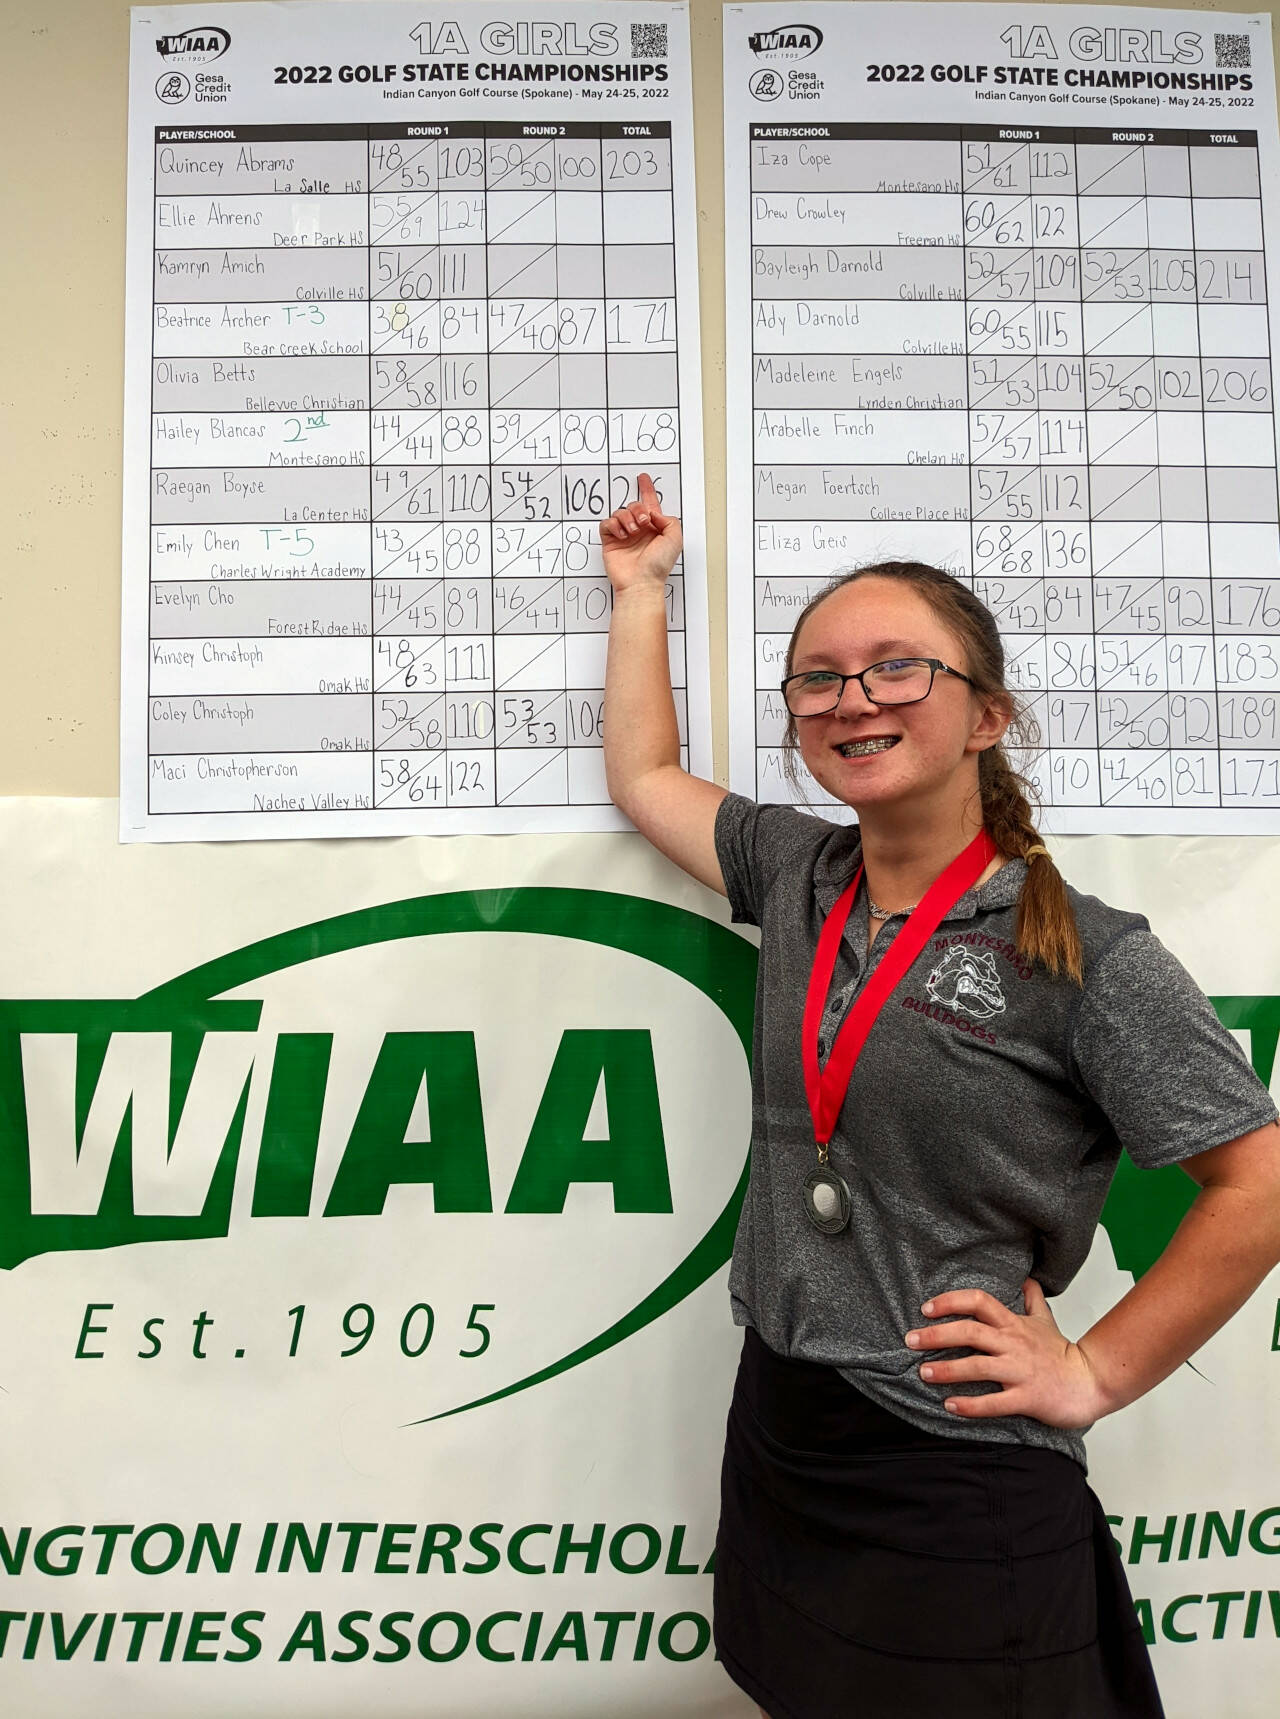 SUBMITTED PHOTO Montesano sophomore Hailey Blancas points to her score after placing second at the 1A State Girls Golf Tournament on Wednesday at Indian Canyon Golf Course in Spokane.